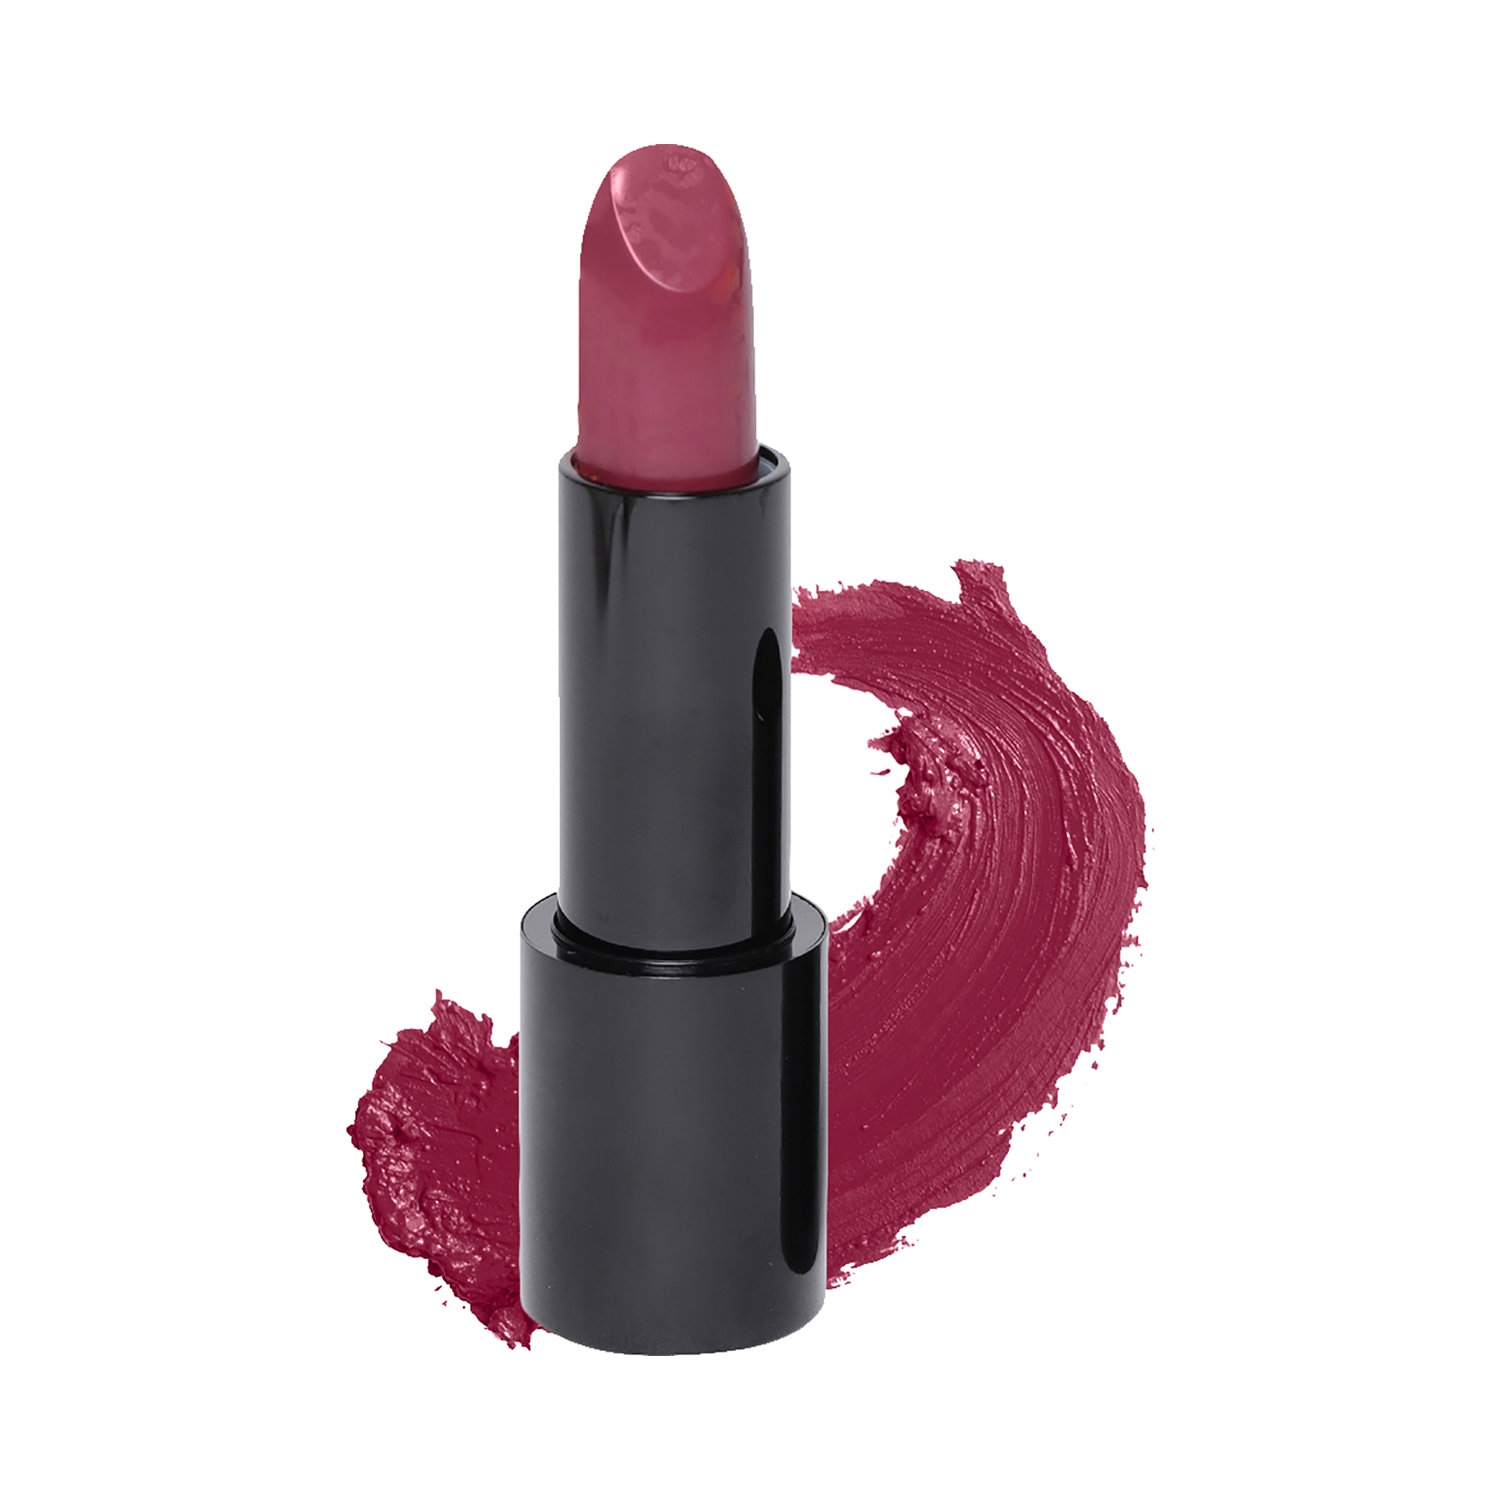 Paese Cosmetics | Paese Cosmetics Lipstick with Argan Oil - 32 Shade (4.3g)